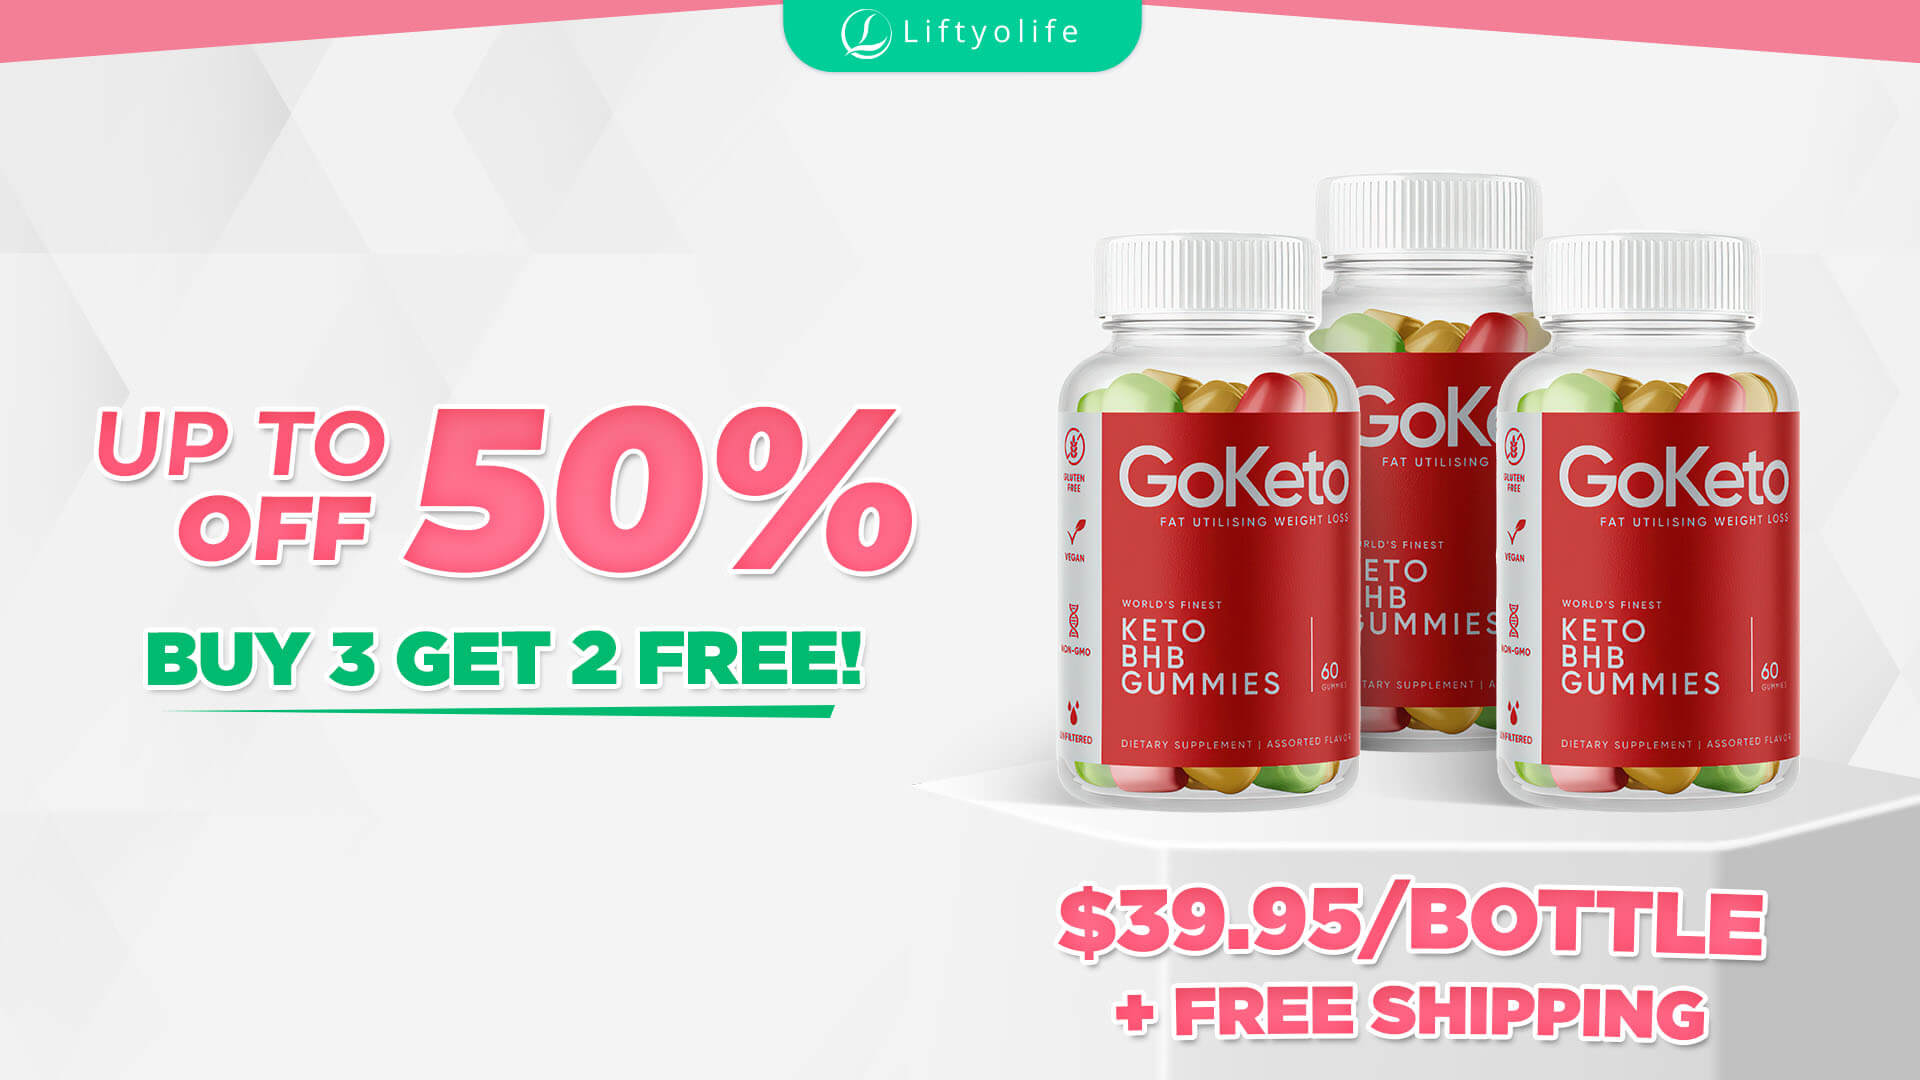 GoKeto Gummies Review: The Pricing